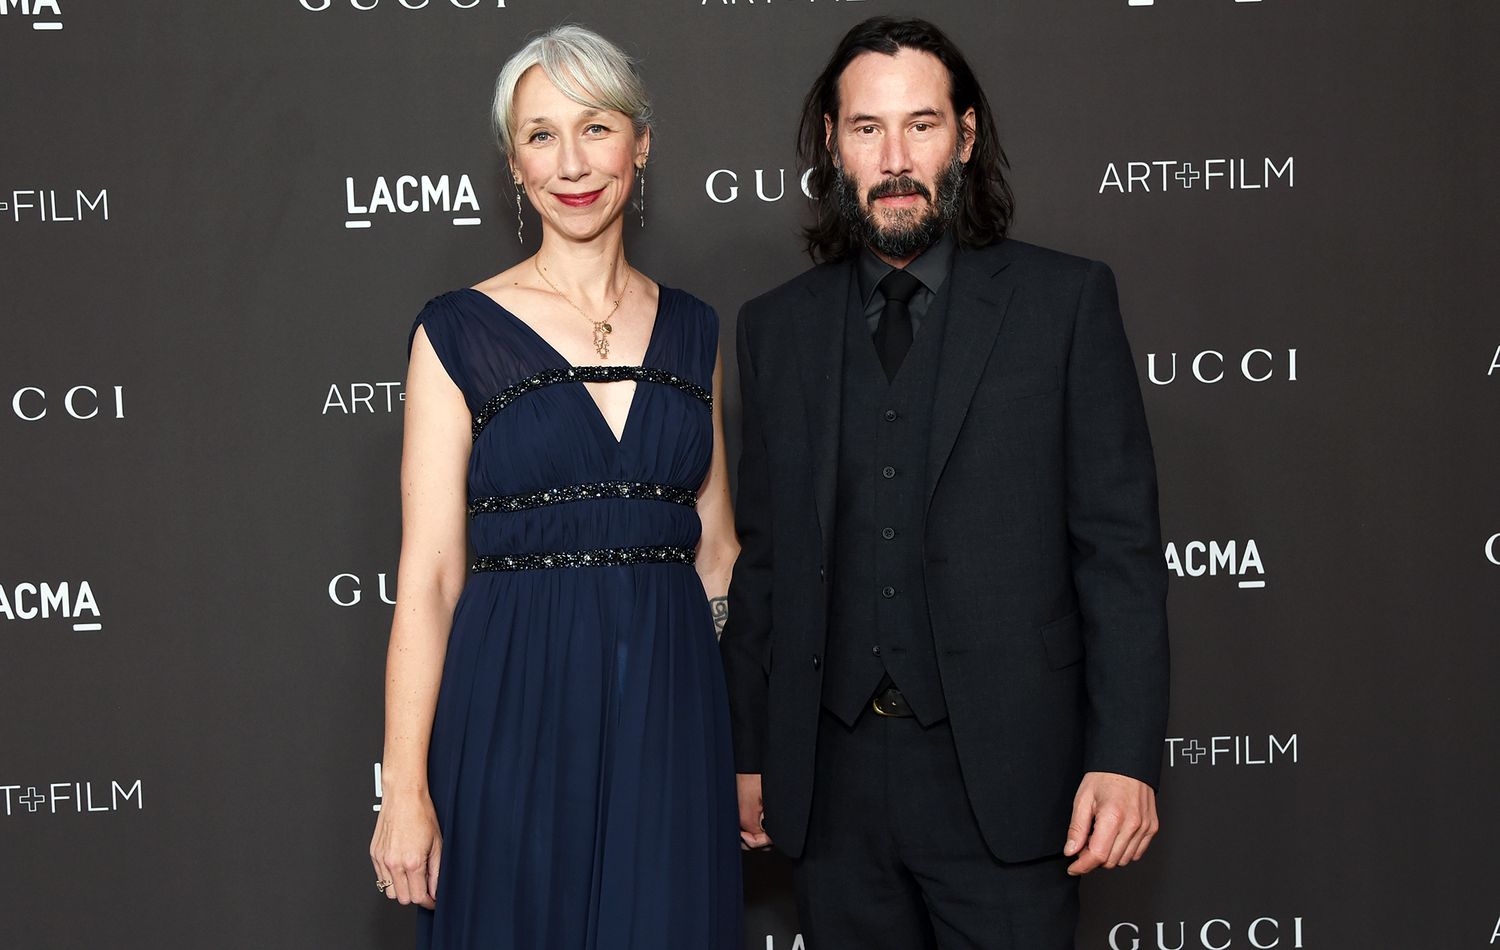 Alexandra Grant: The Artist Who Captured Keanu Reeves’ Heart